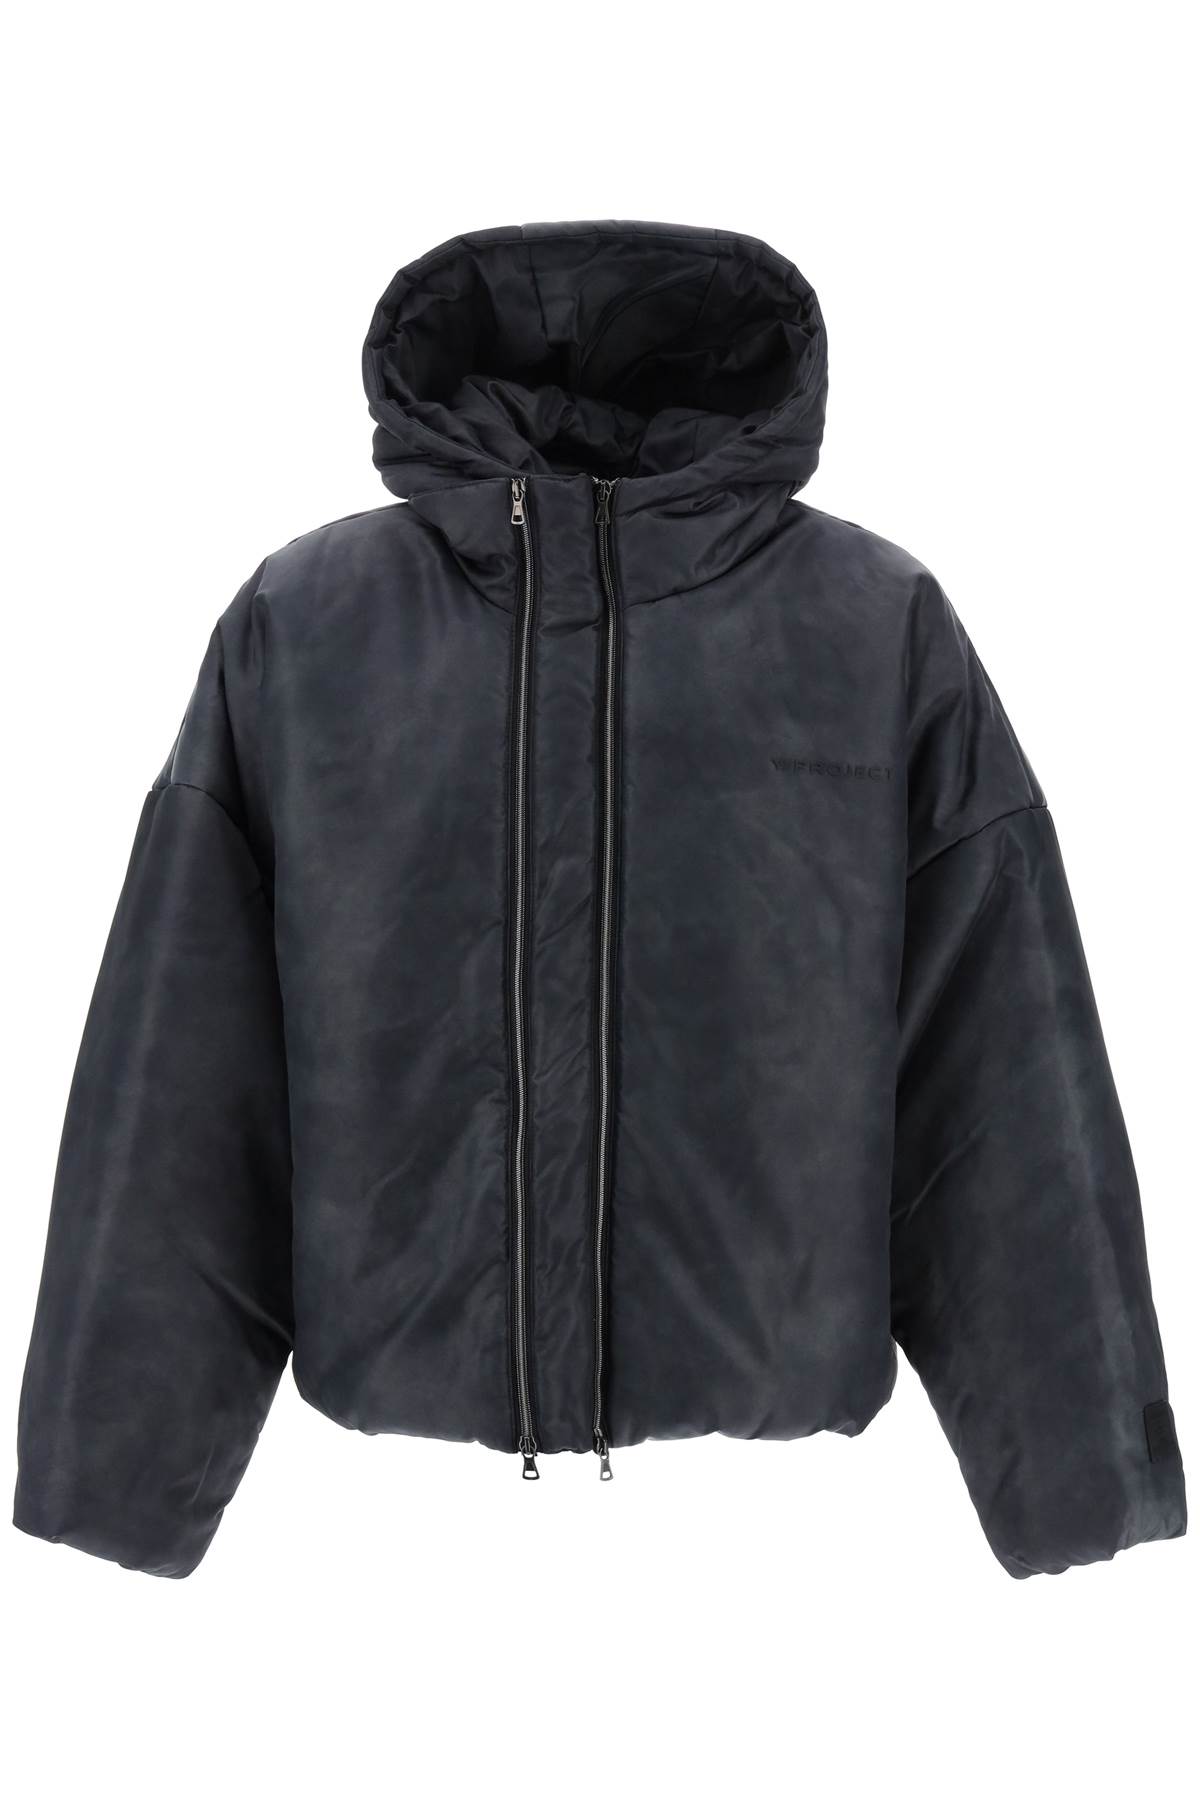 Y/PROJECT DOUBLE COLLAR PUFFER JACKET